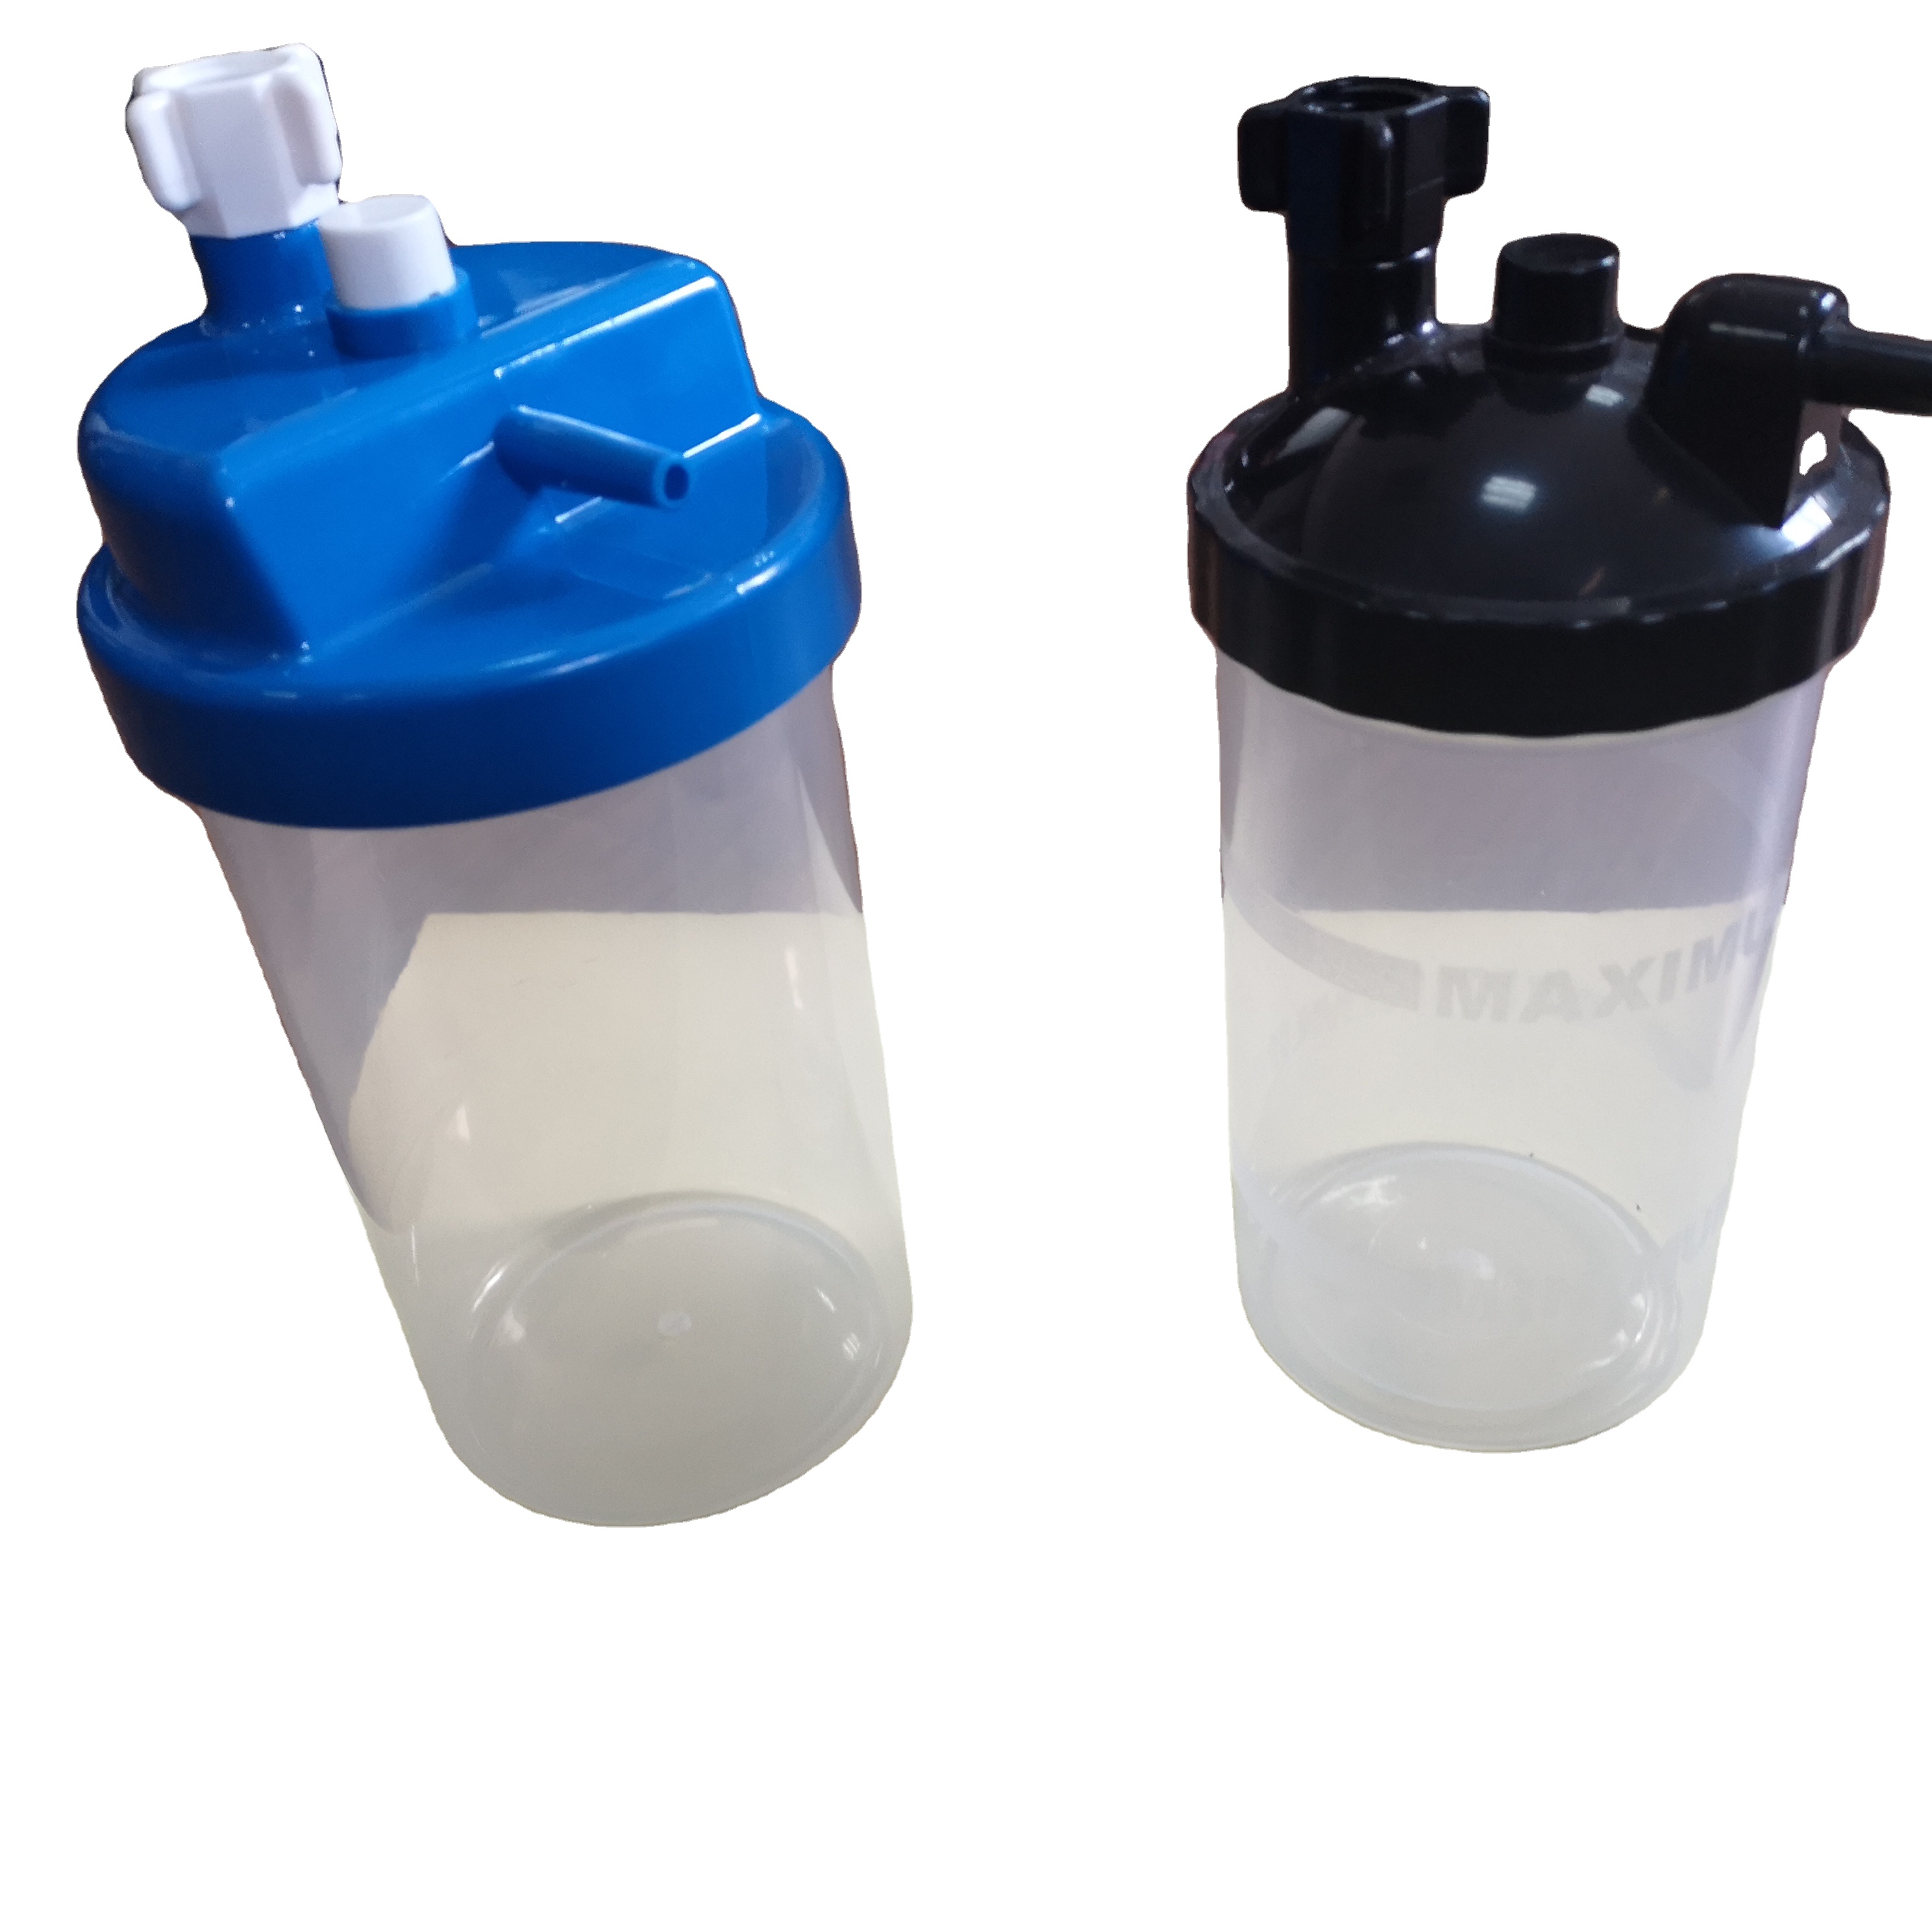 Factory Direct Medical <a href='/oxygen-concentrator/'>Oxygen Concentrator</a> Humidifiers - 250/500ml Bottle Sizes